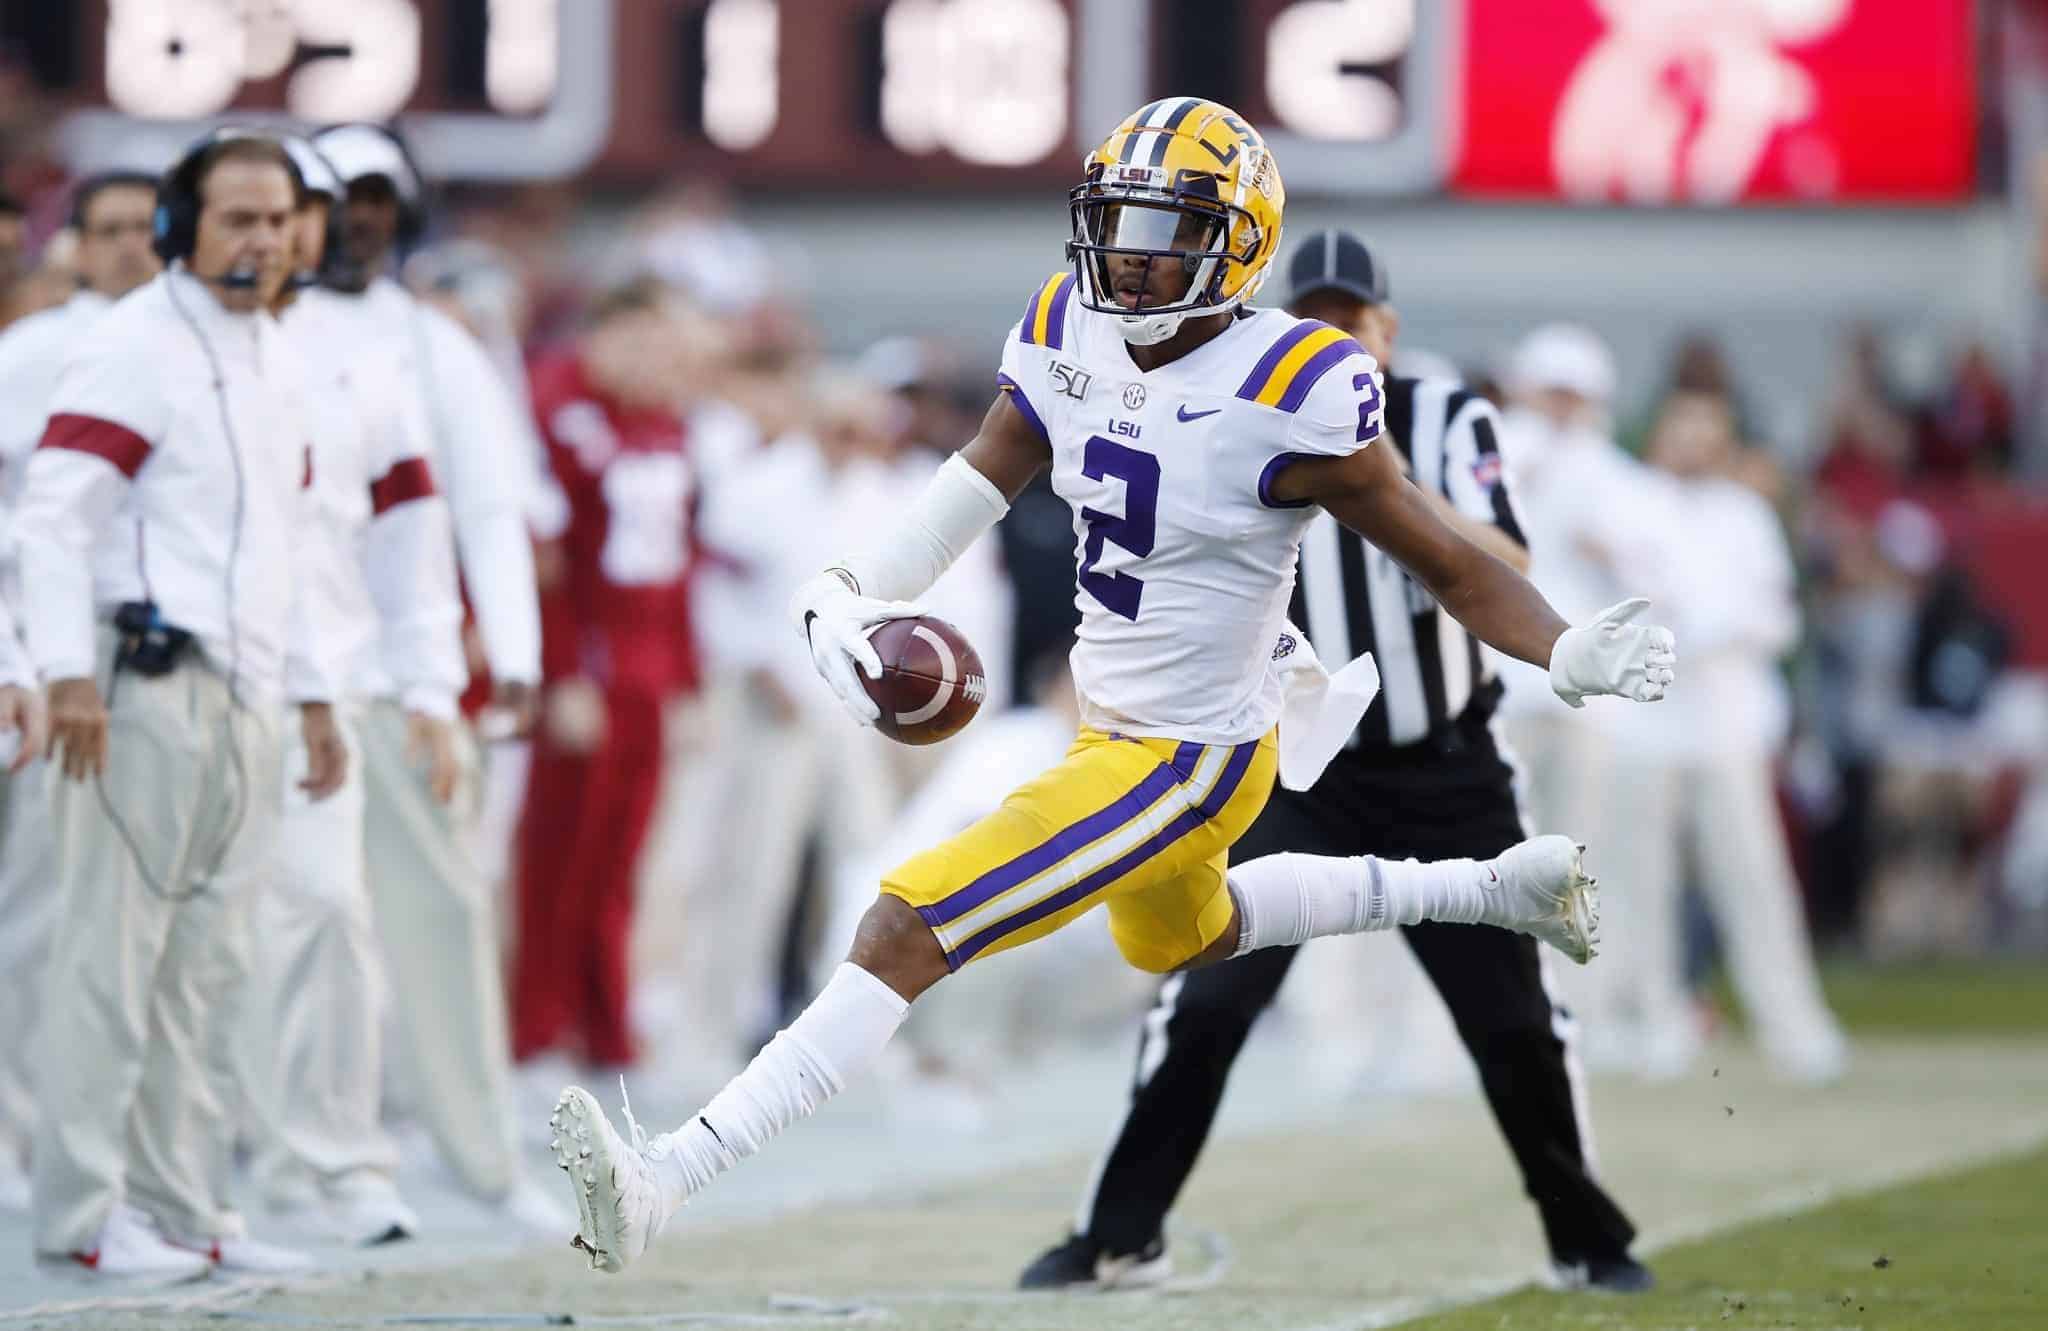 TUSCALOOSA, ALABAMA - NOVEMBER 09: Justin Jefferson #2 of the LSU Tigers goes out of bounds during the first half against the Alabama Crimson Tide in the game at Bryant-Denny Stadium on November 09, 2019 in Tuscaloosa, Alabama. New York Jets